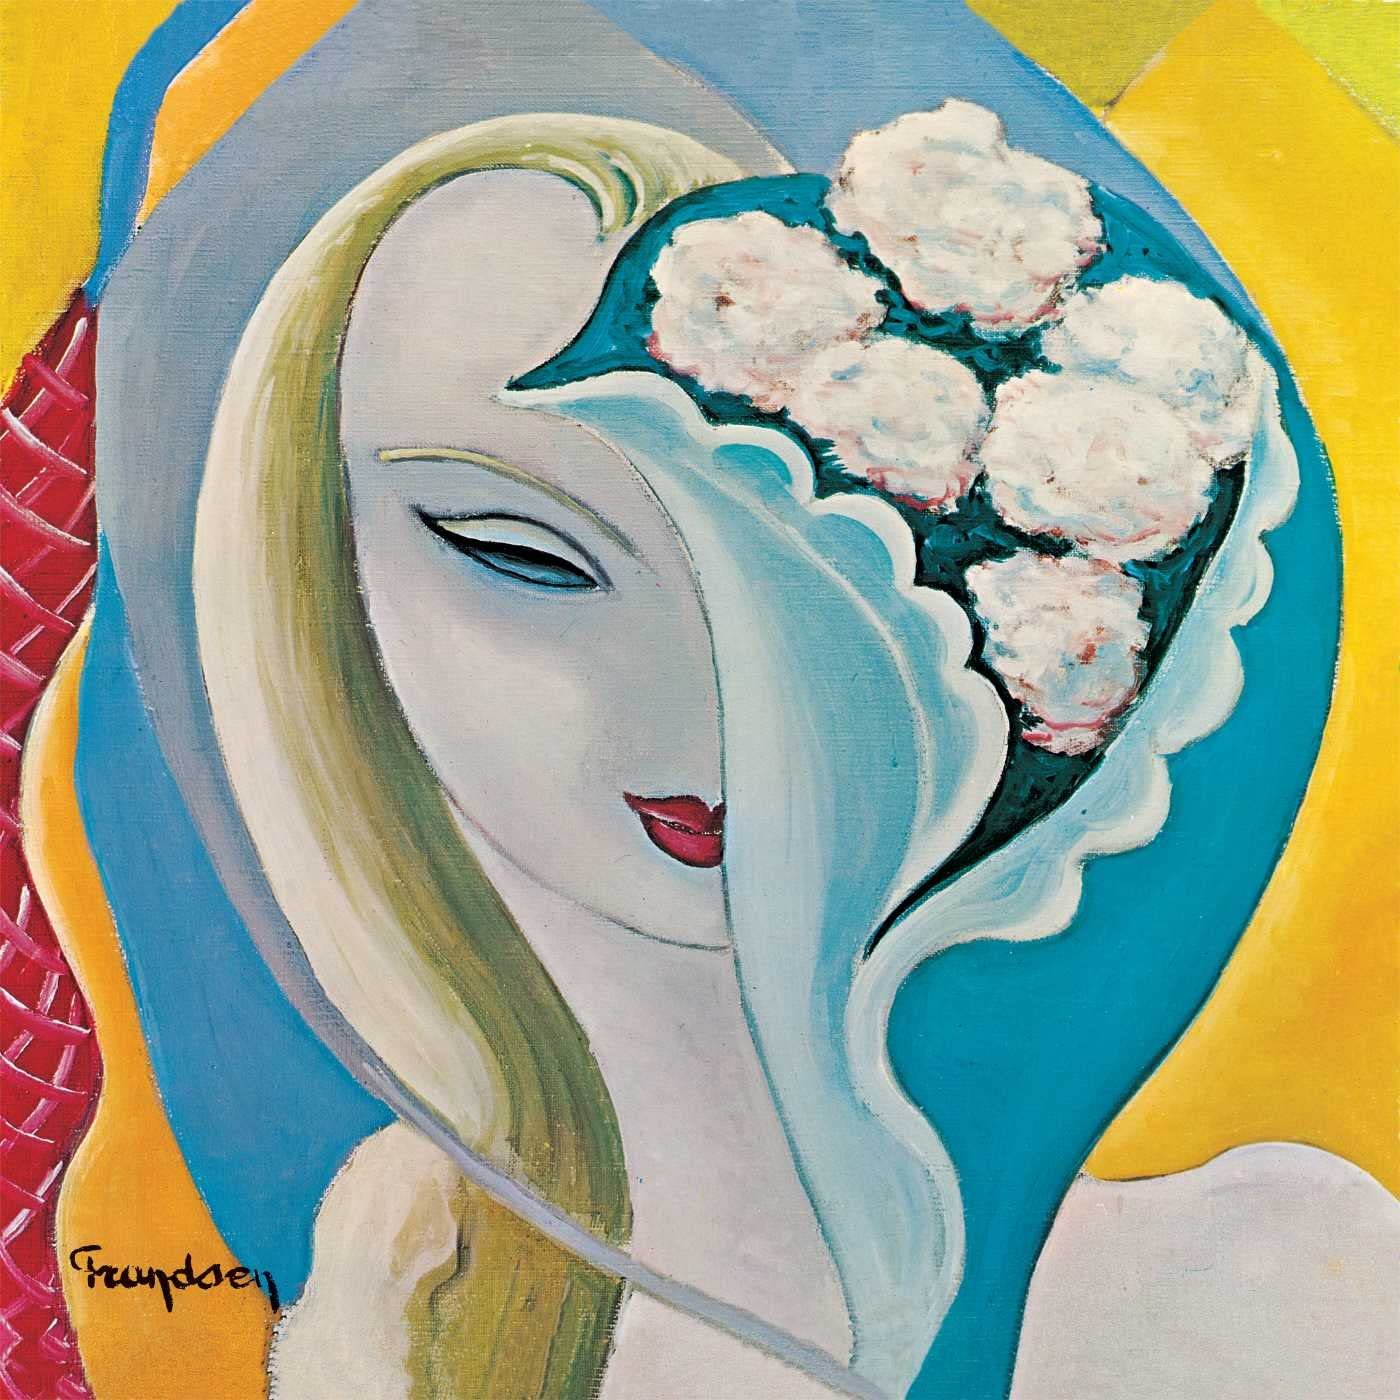 Derek & The Dominos – Layla And Other Assorted Love Songs cover album